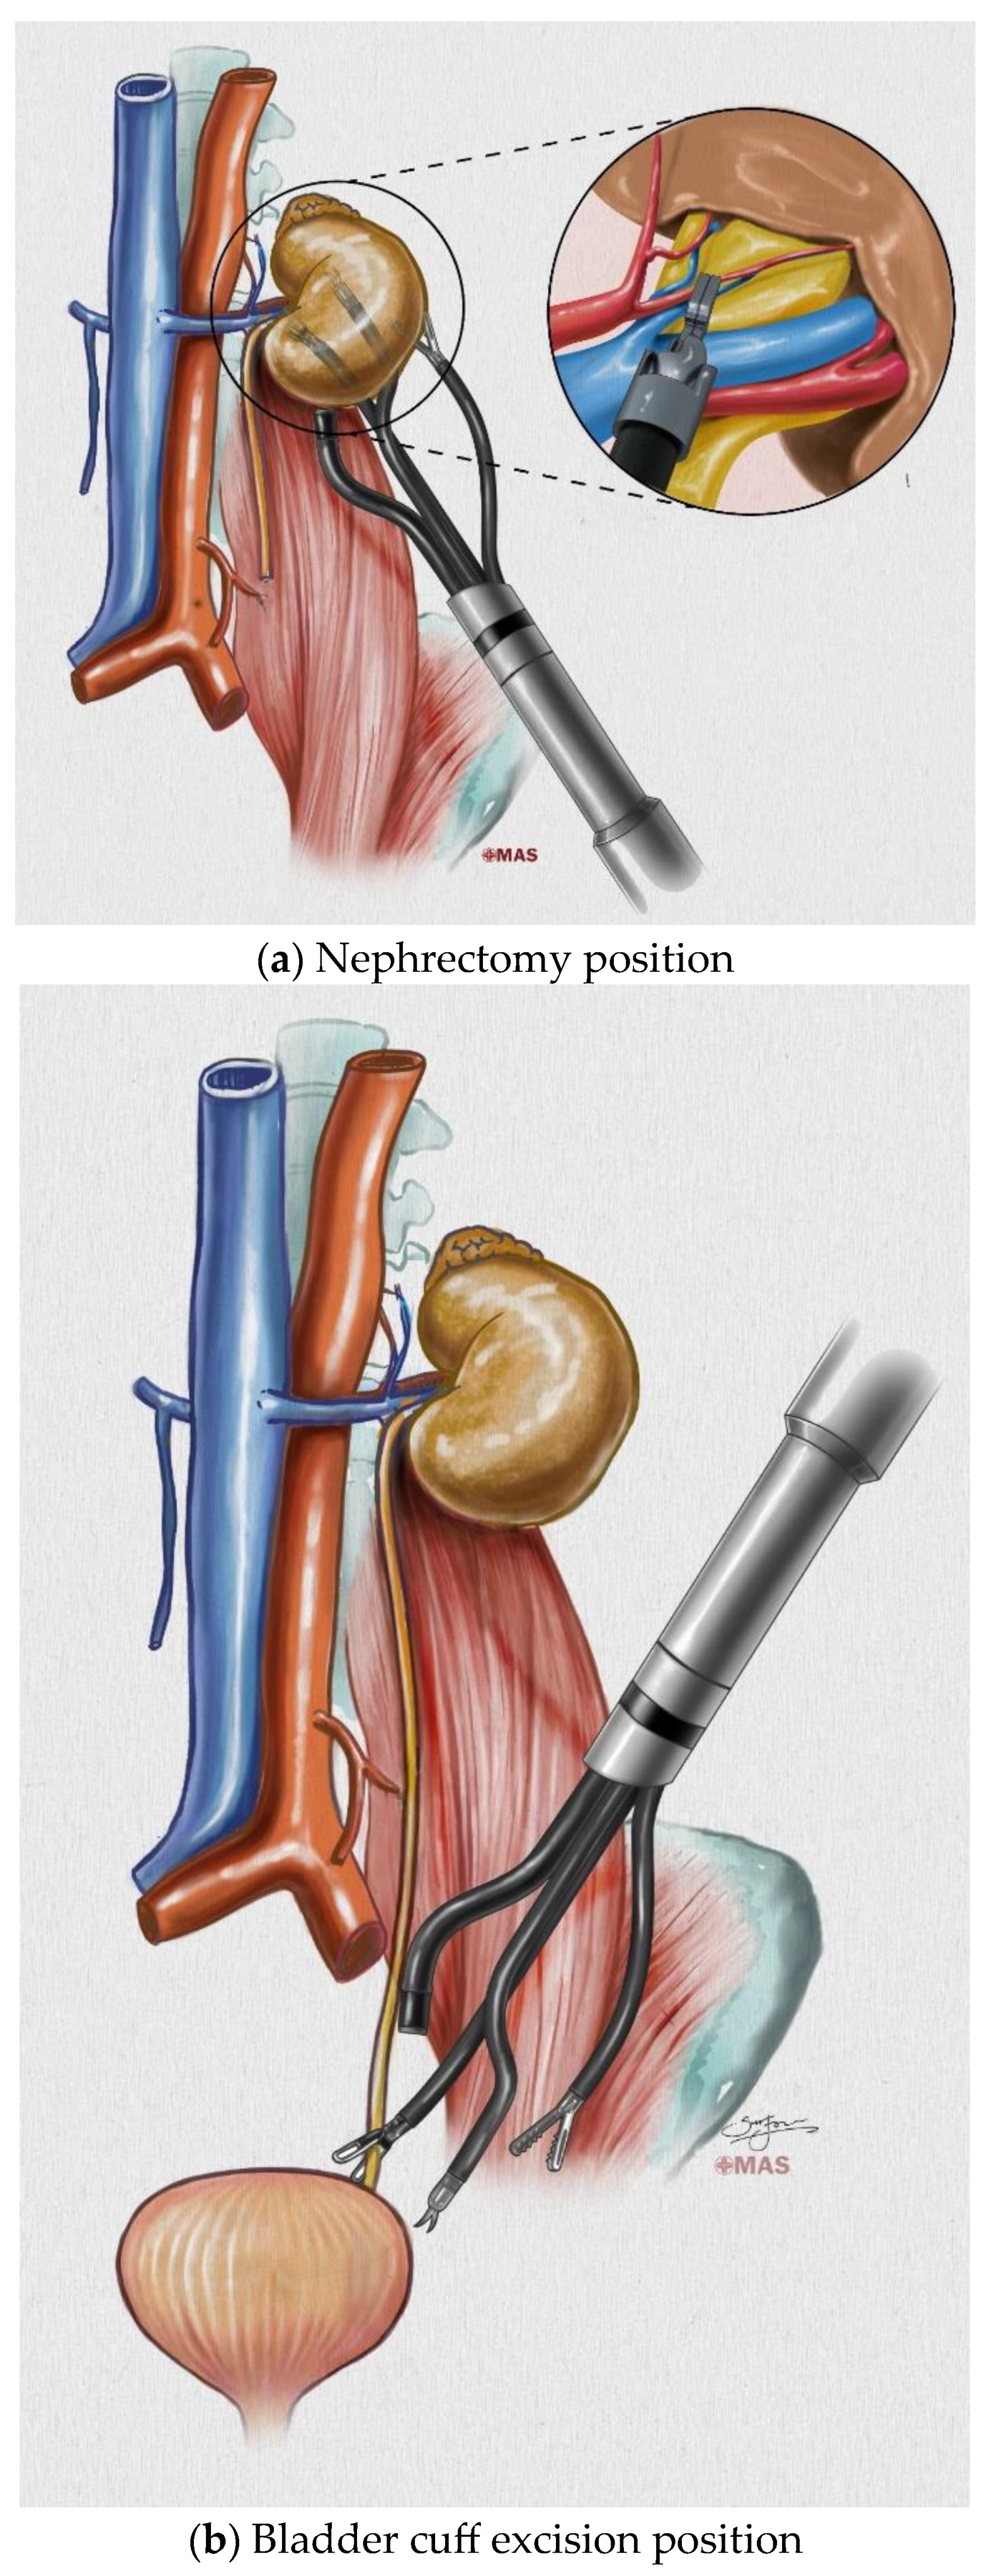 JCM | Free Full-Text | Retroperitoneal Single-Port Robot-Assisted  Nephroureterectomy with Bladder Cuff Excision: Initial Experience and  Description of the Technique